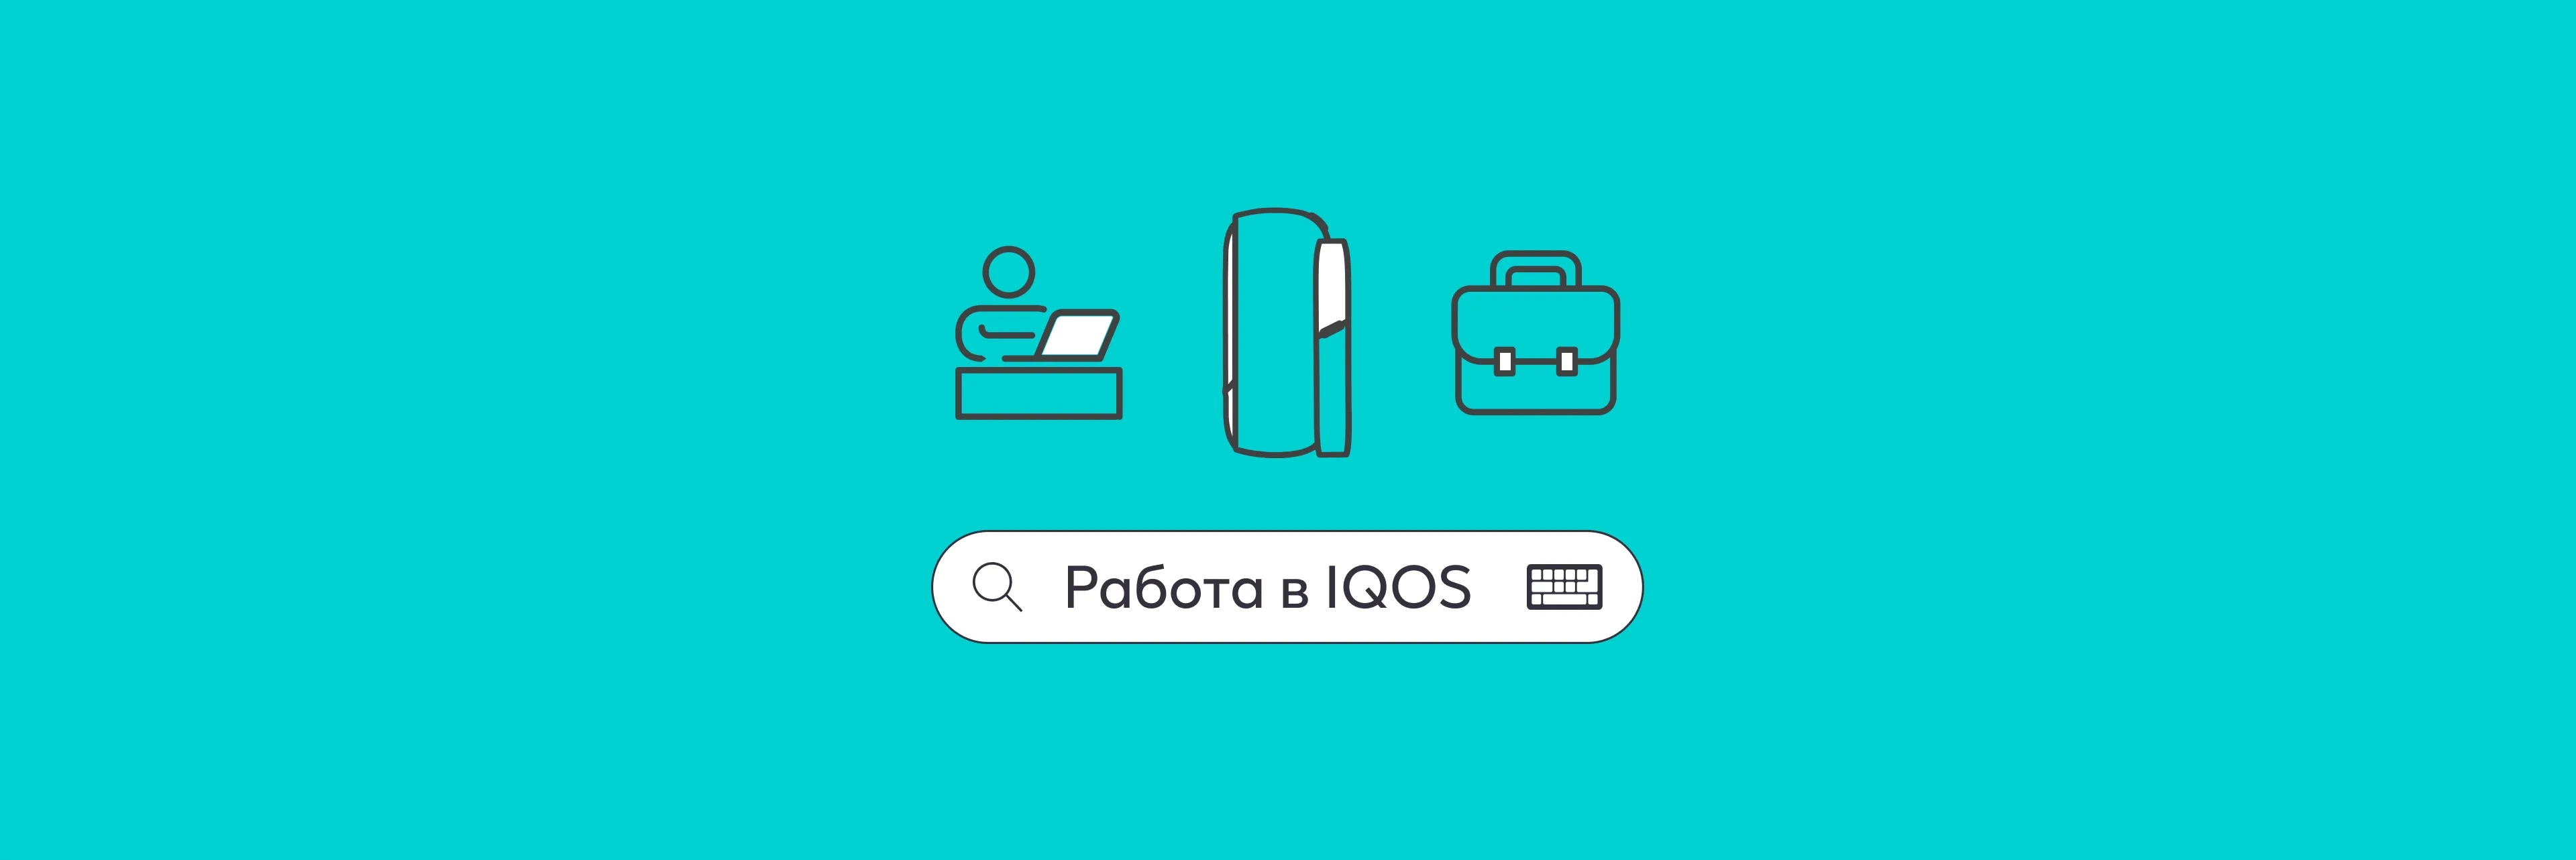 how-to-find-a-job-in-iqos-vacancies-and-contacts